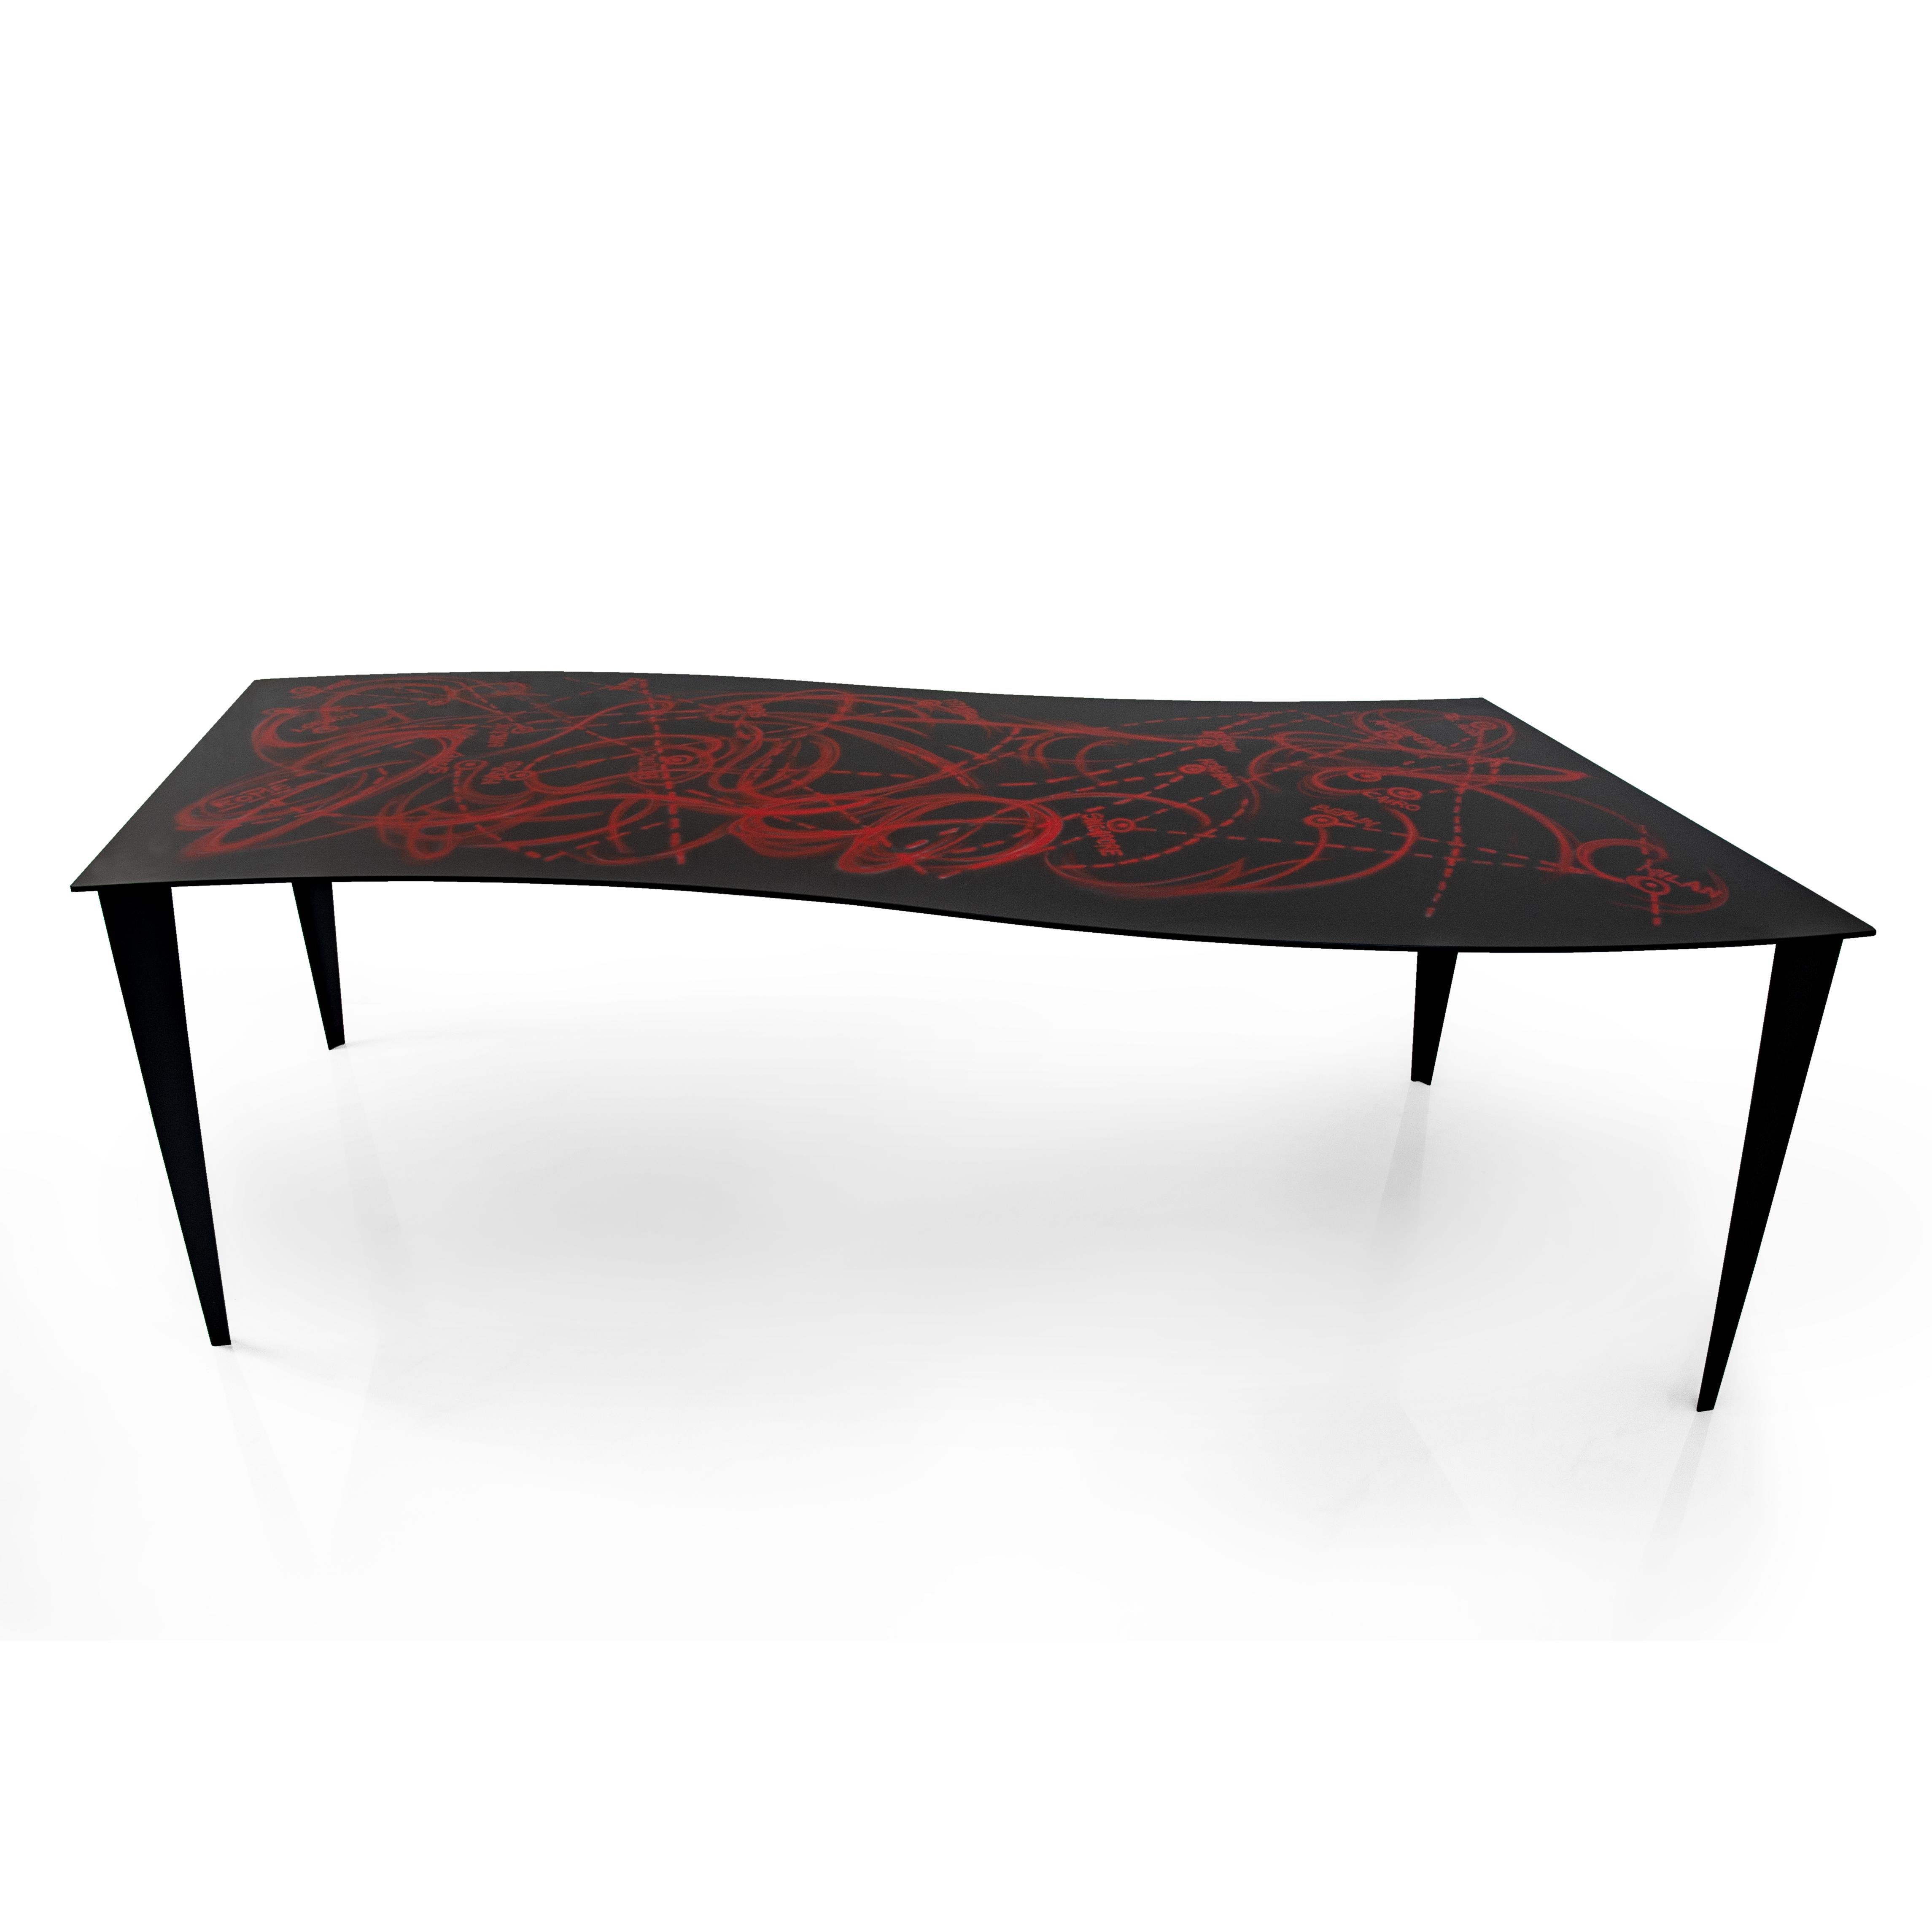 Dining Table in Carbon Fibre and Metal, with decorated top.
99 numbered and signed copies